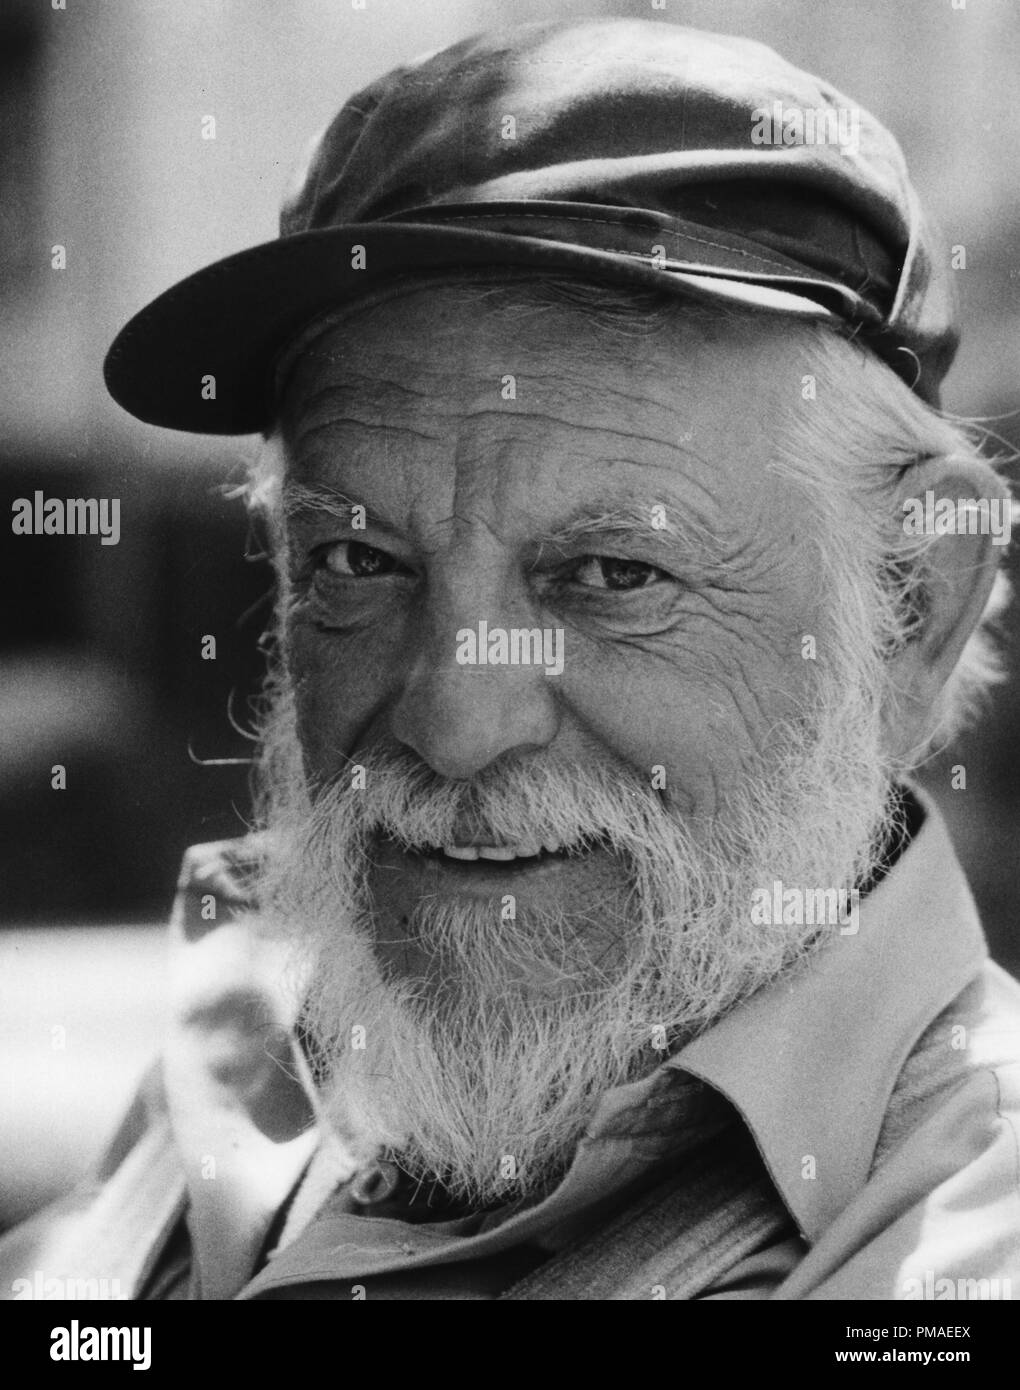 Denver Pyle, 'The Dukes of Hazzard', 1982 Warner Bros. Television  File Reference # 32509 849THA Stock Photo